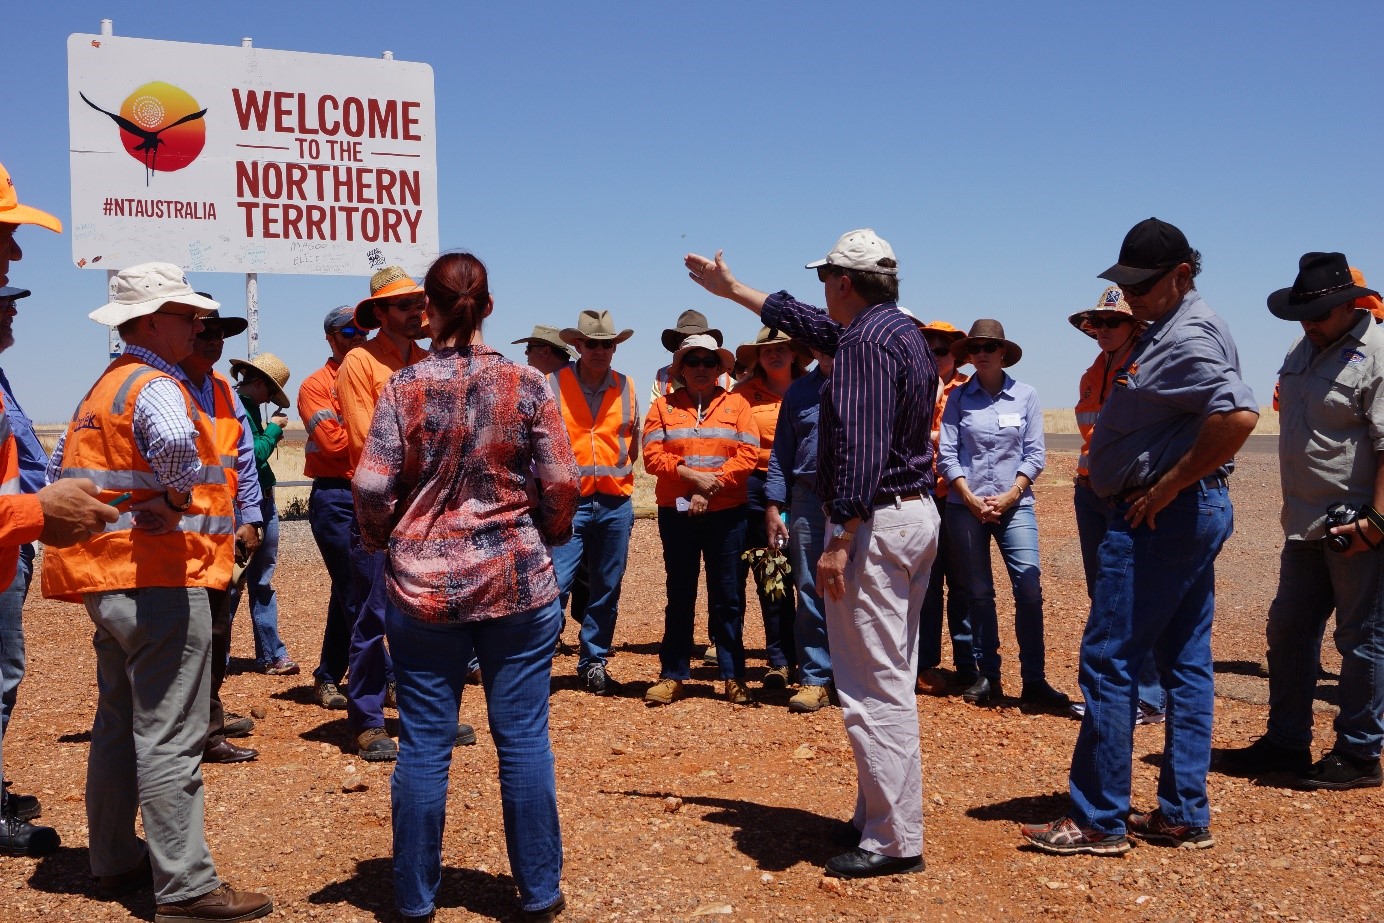 A person speaking to a group of people in high-vis clothing next to a 'Welcome to the Northern Territory' sign